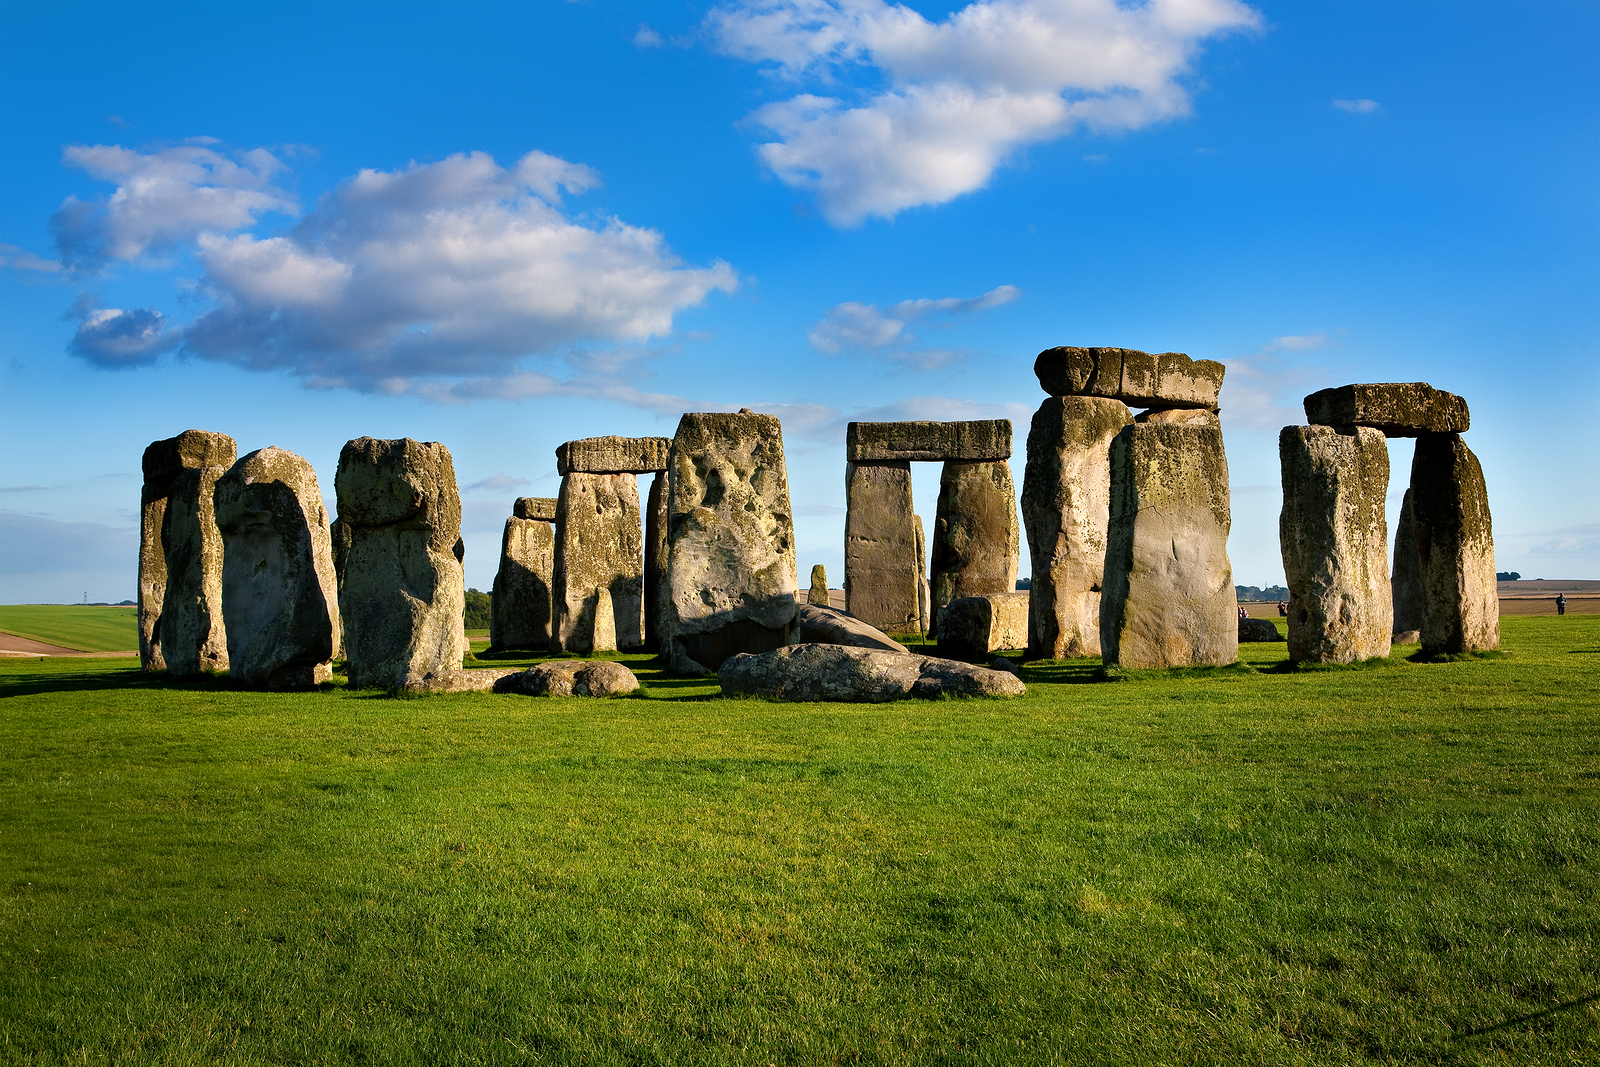 Stonehenge - one of the wonders of the world and best known prehistoric monument in Europe. 